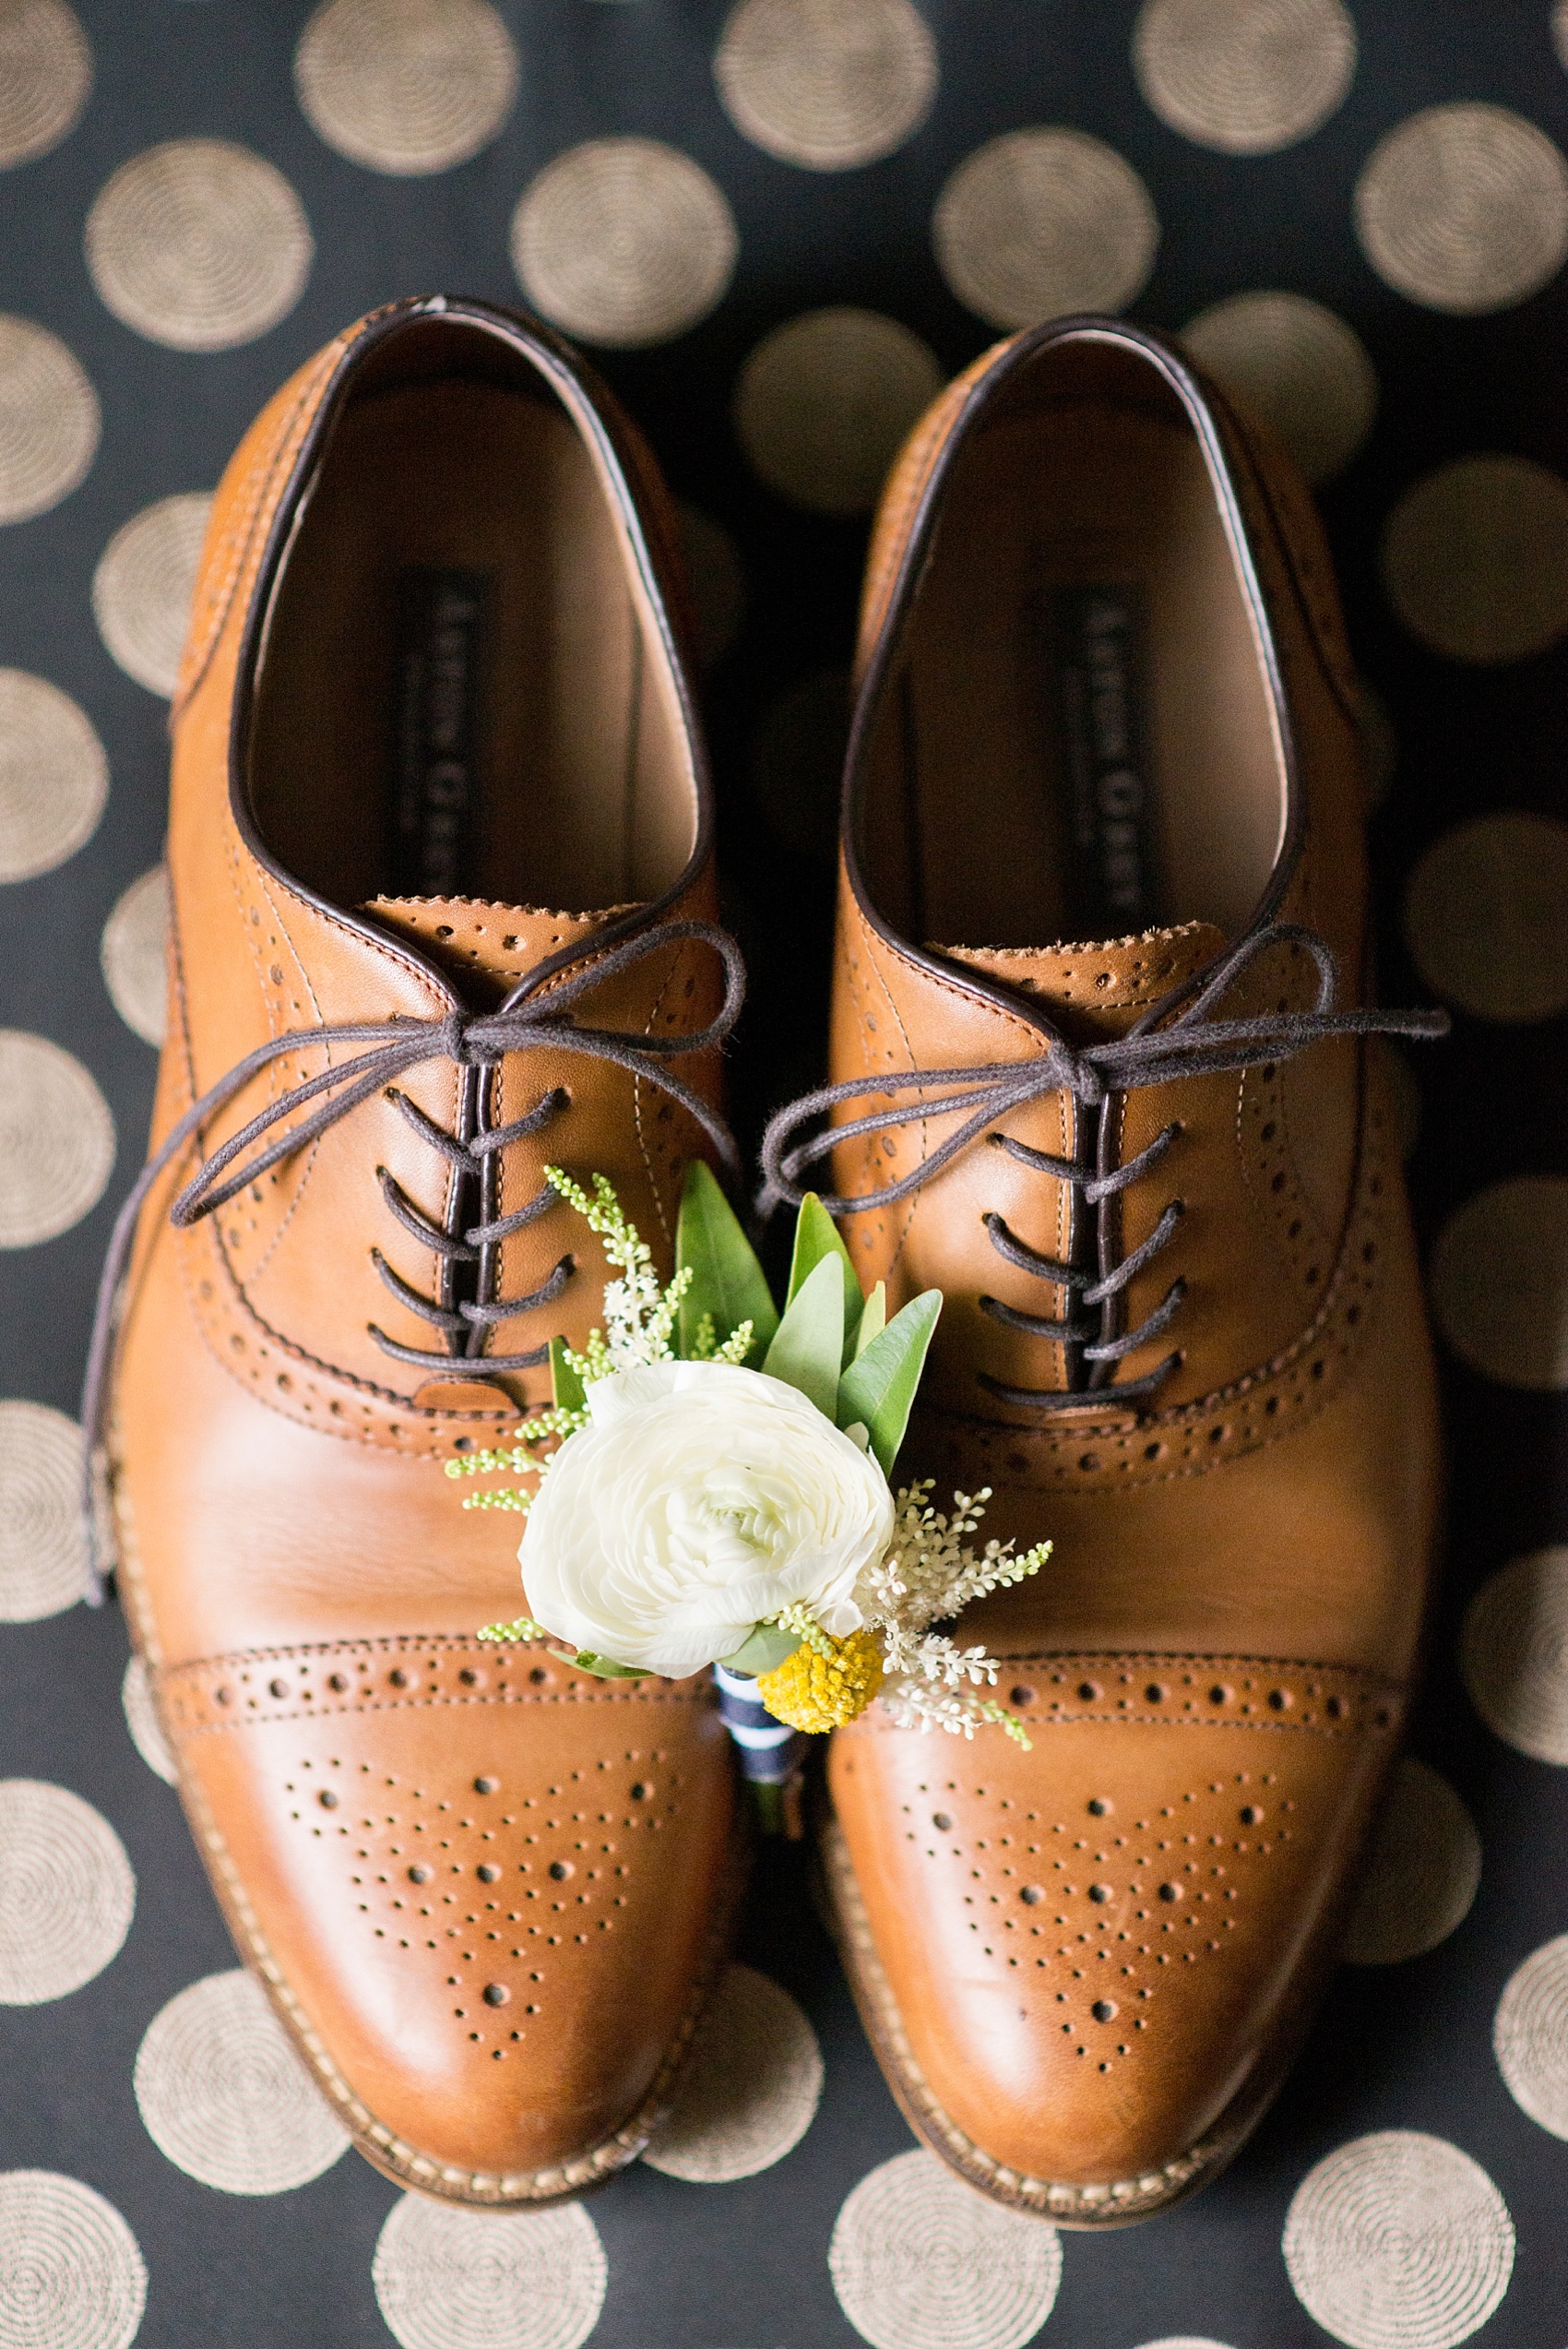 Groom gets ready with his brown shoes and ranunculus boutonniere at the Molly Pitcher Inn. Photo by Mikkel Paige Photography.